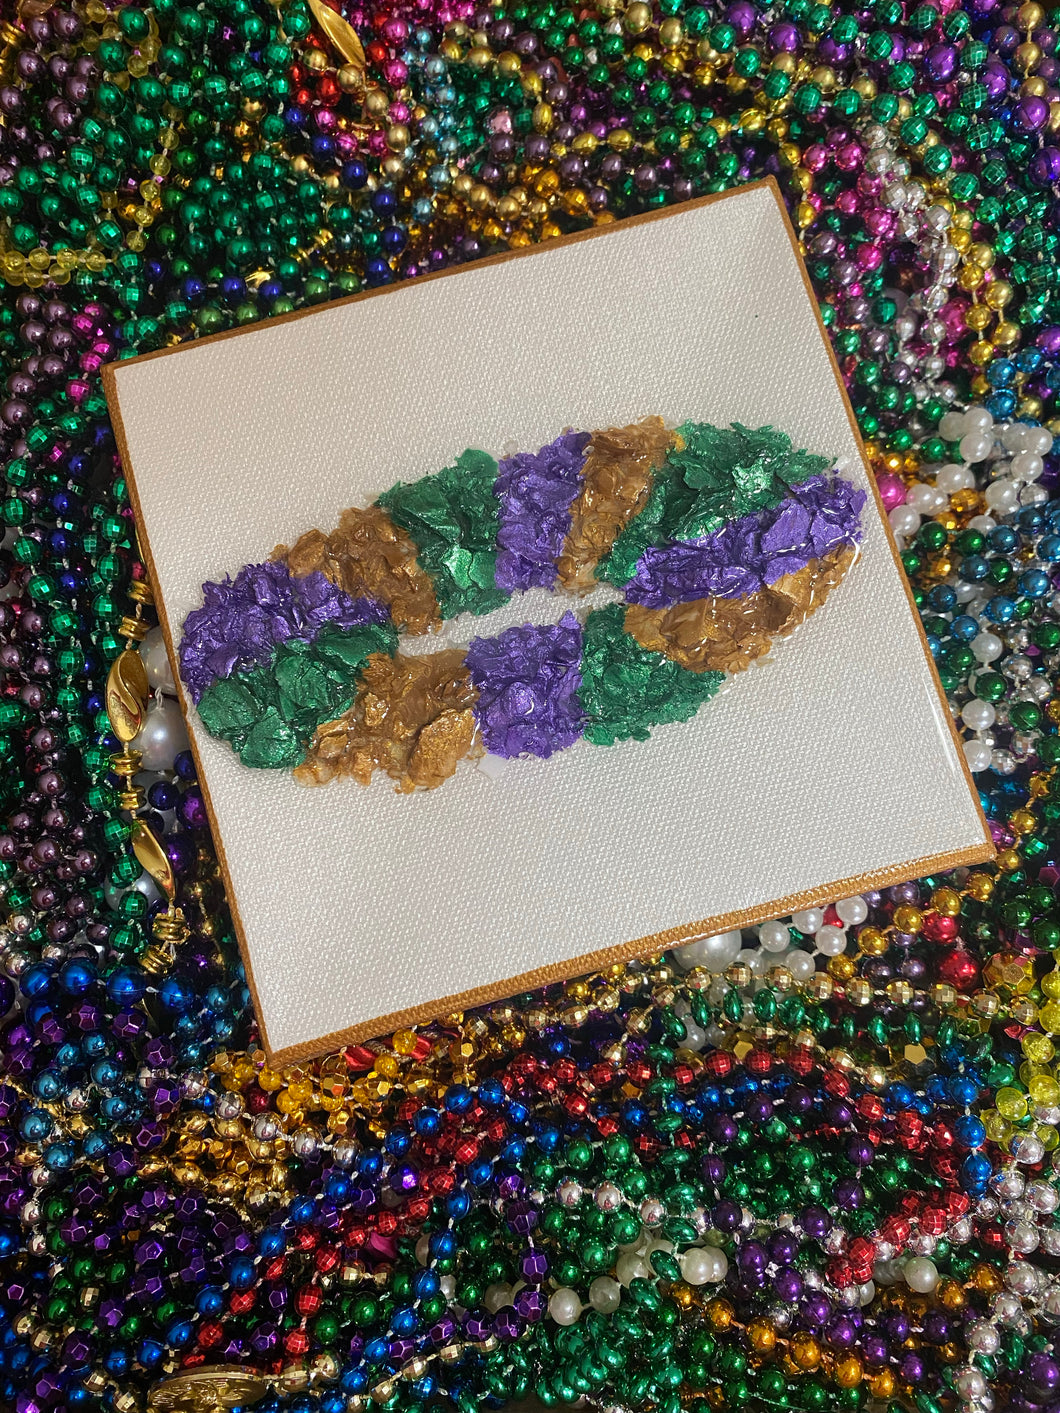 Large King Cake Oyster Art Canvas